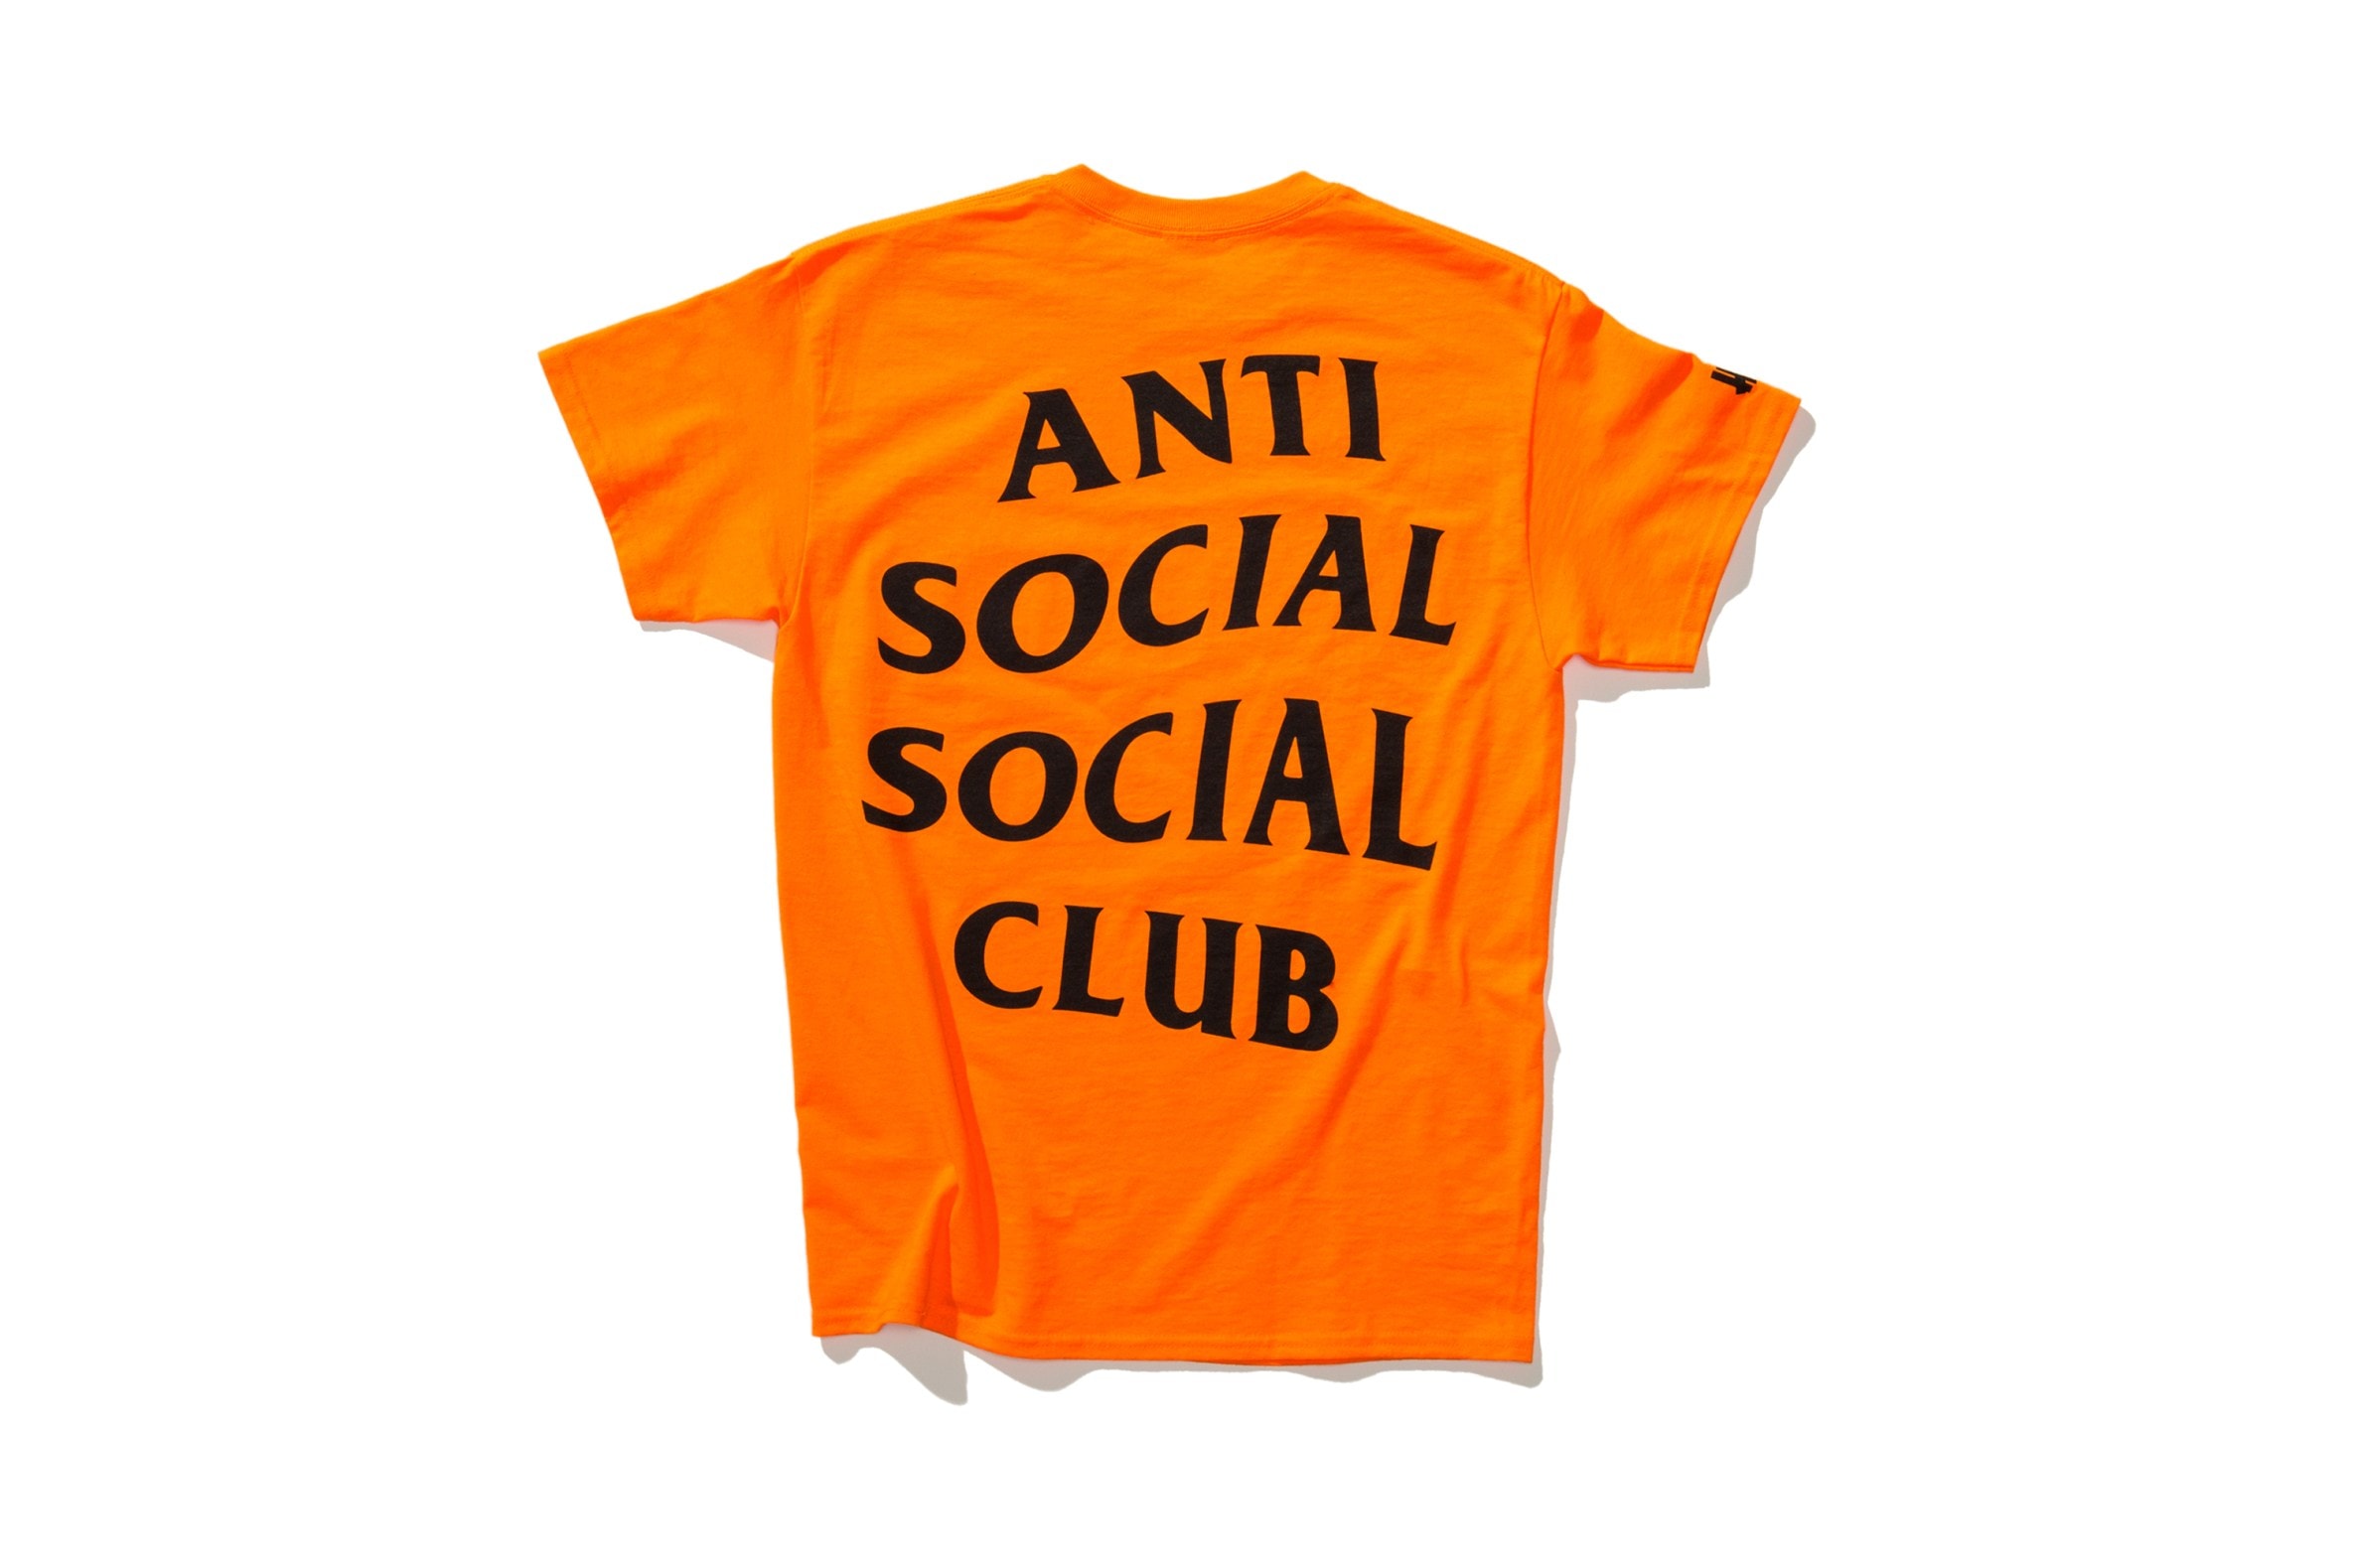 UNDEFEATED x Anti Social Social Club 2016 Capsule Collection